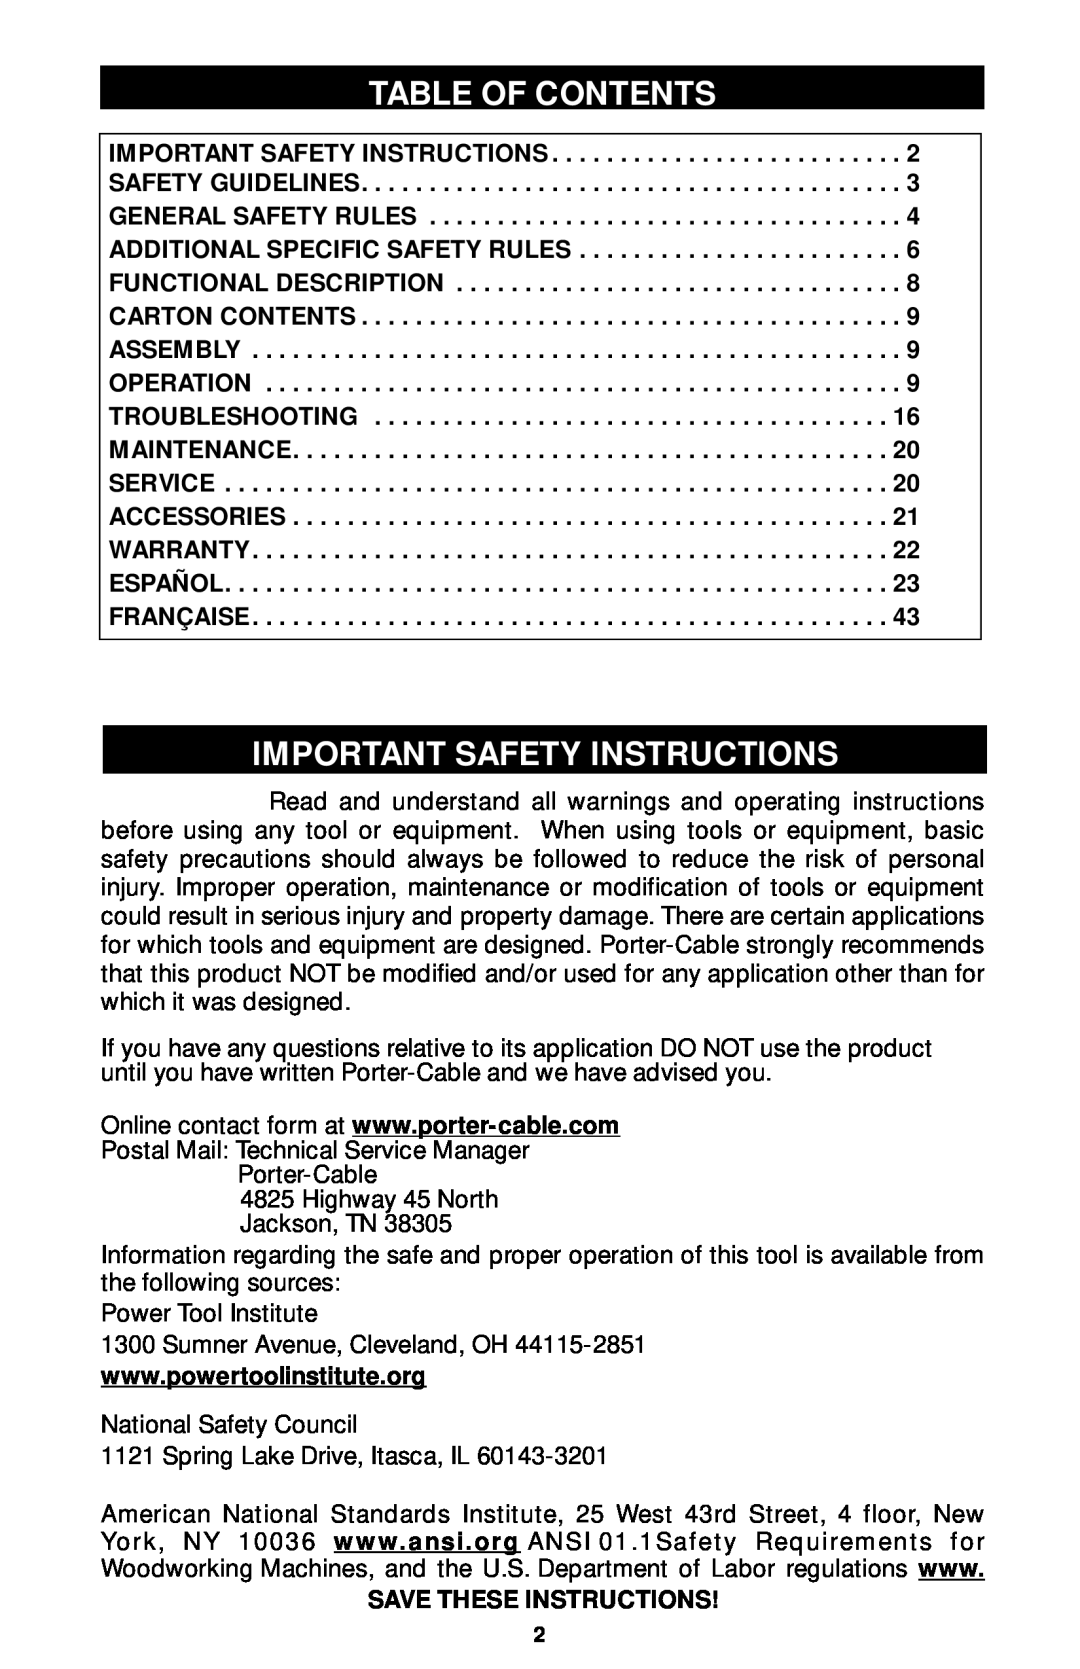 Porter-Cable 7319, 7310, 7320, 7312 instruction manual Table Of Contents, Important Safety Instructions 